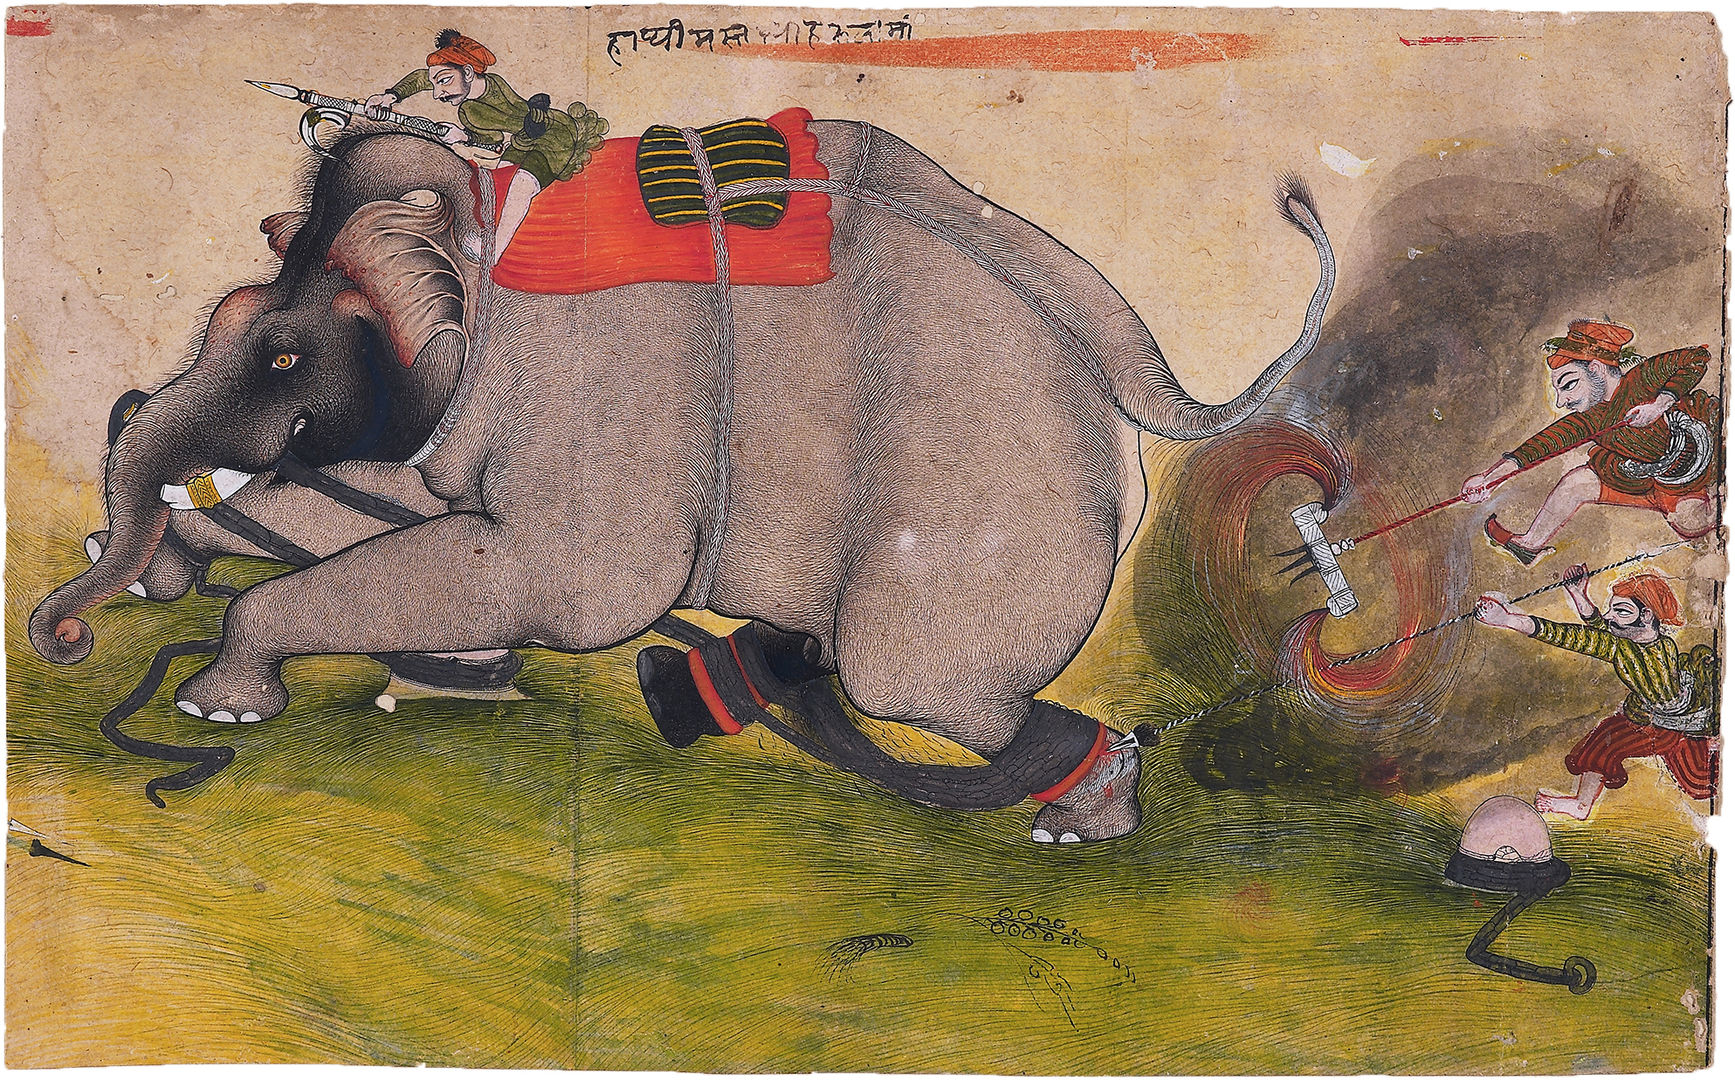 Painting of an enraged elephant in a state of heat